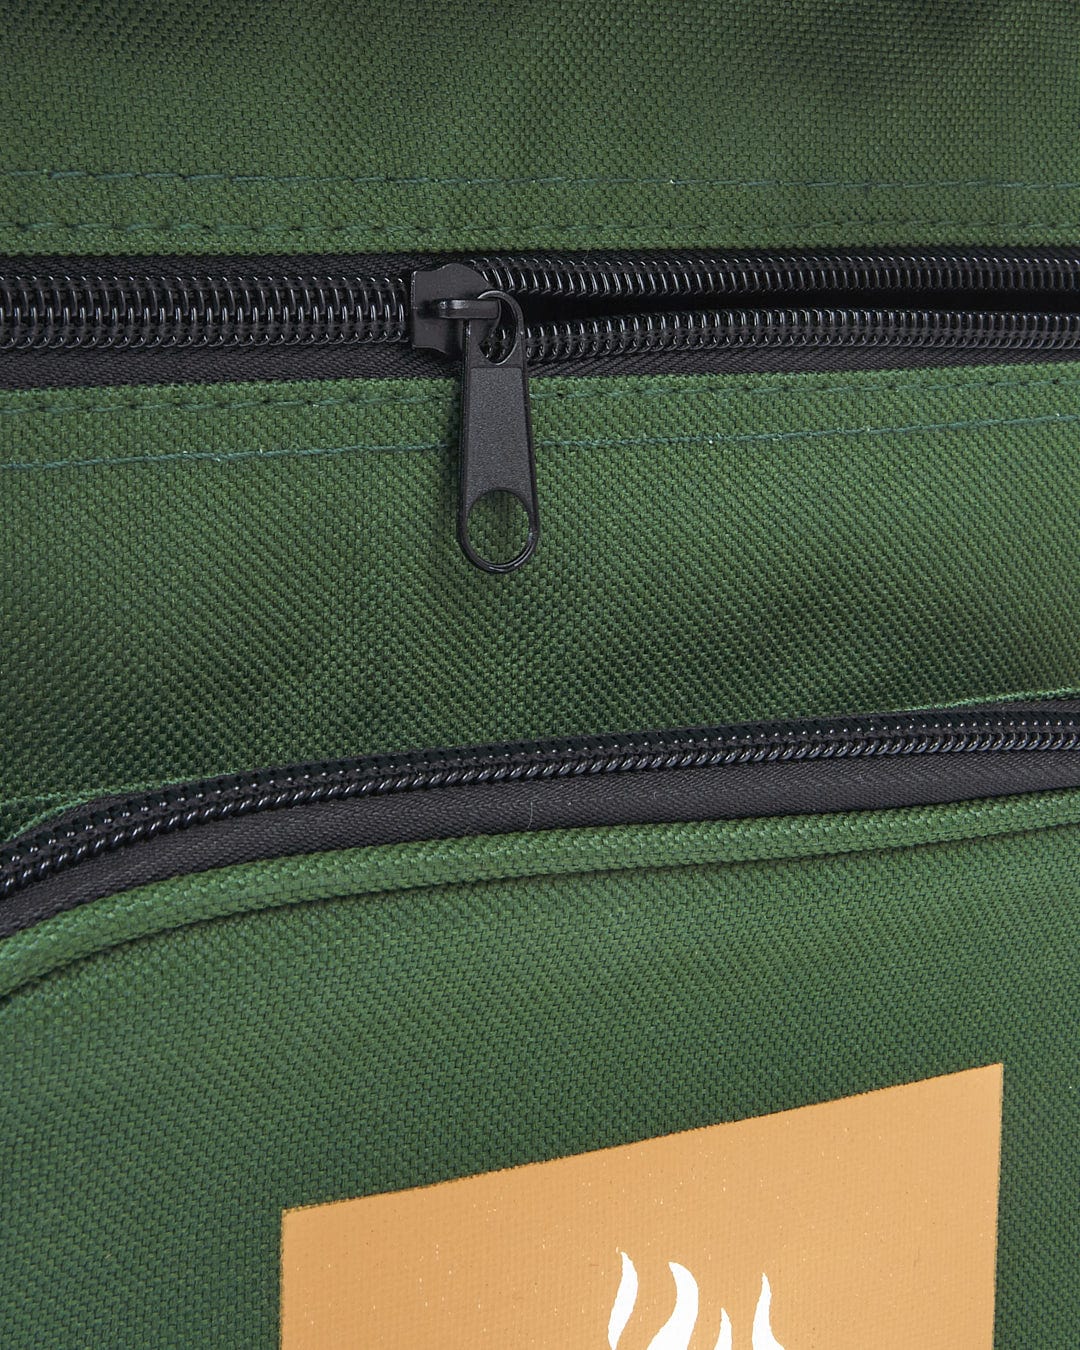 A close up of a Saltrock Spectator - Foldable Chair with Cooler Bag - Dark Green backpack with a logo on it.